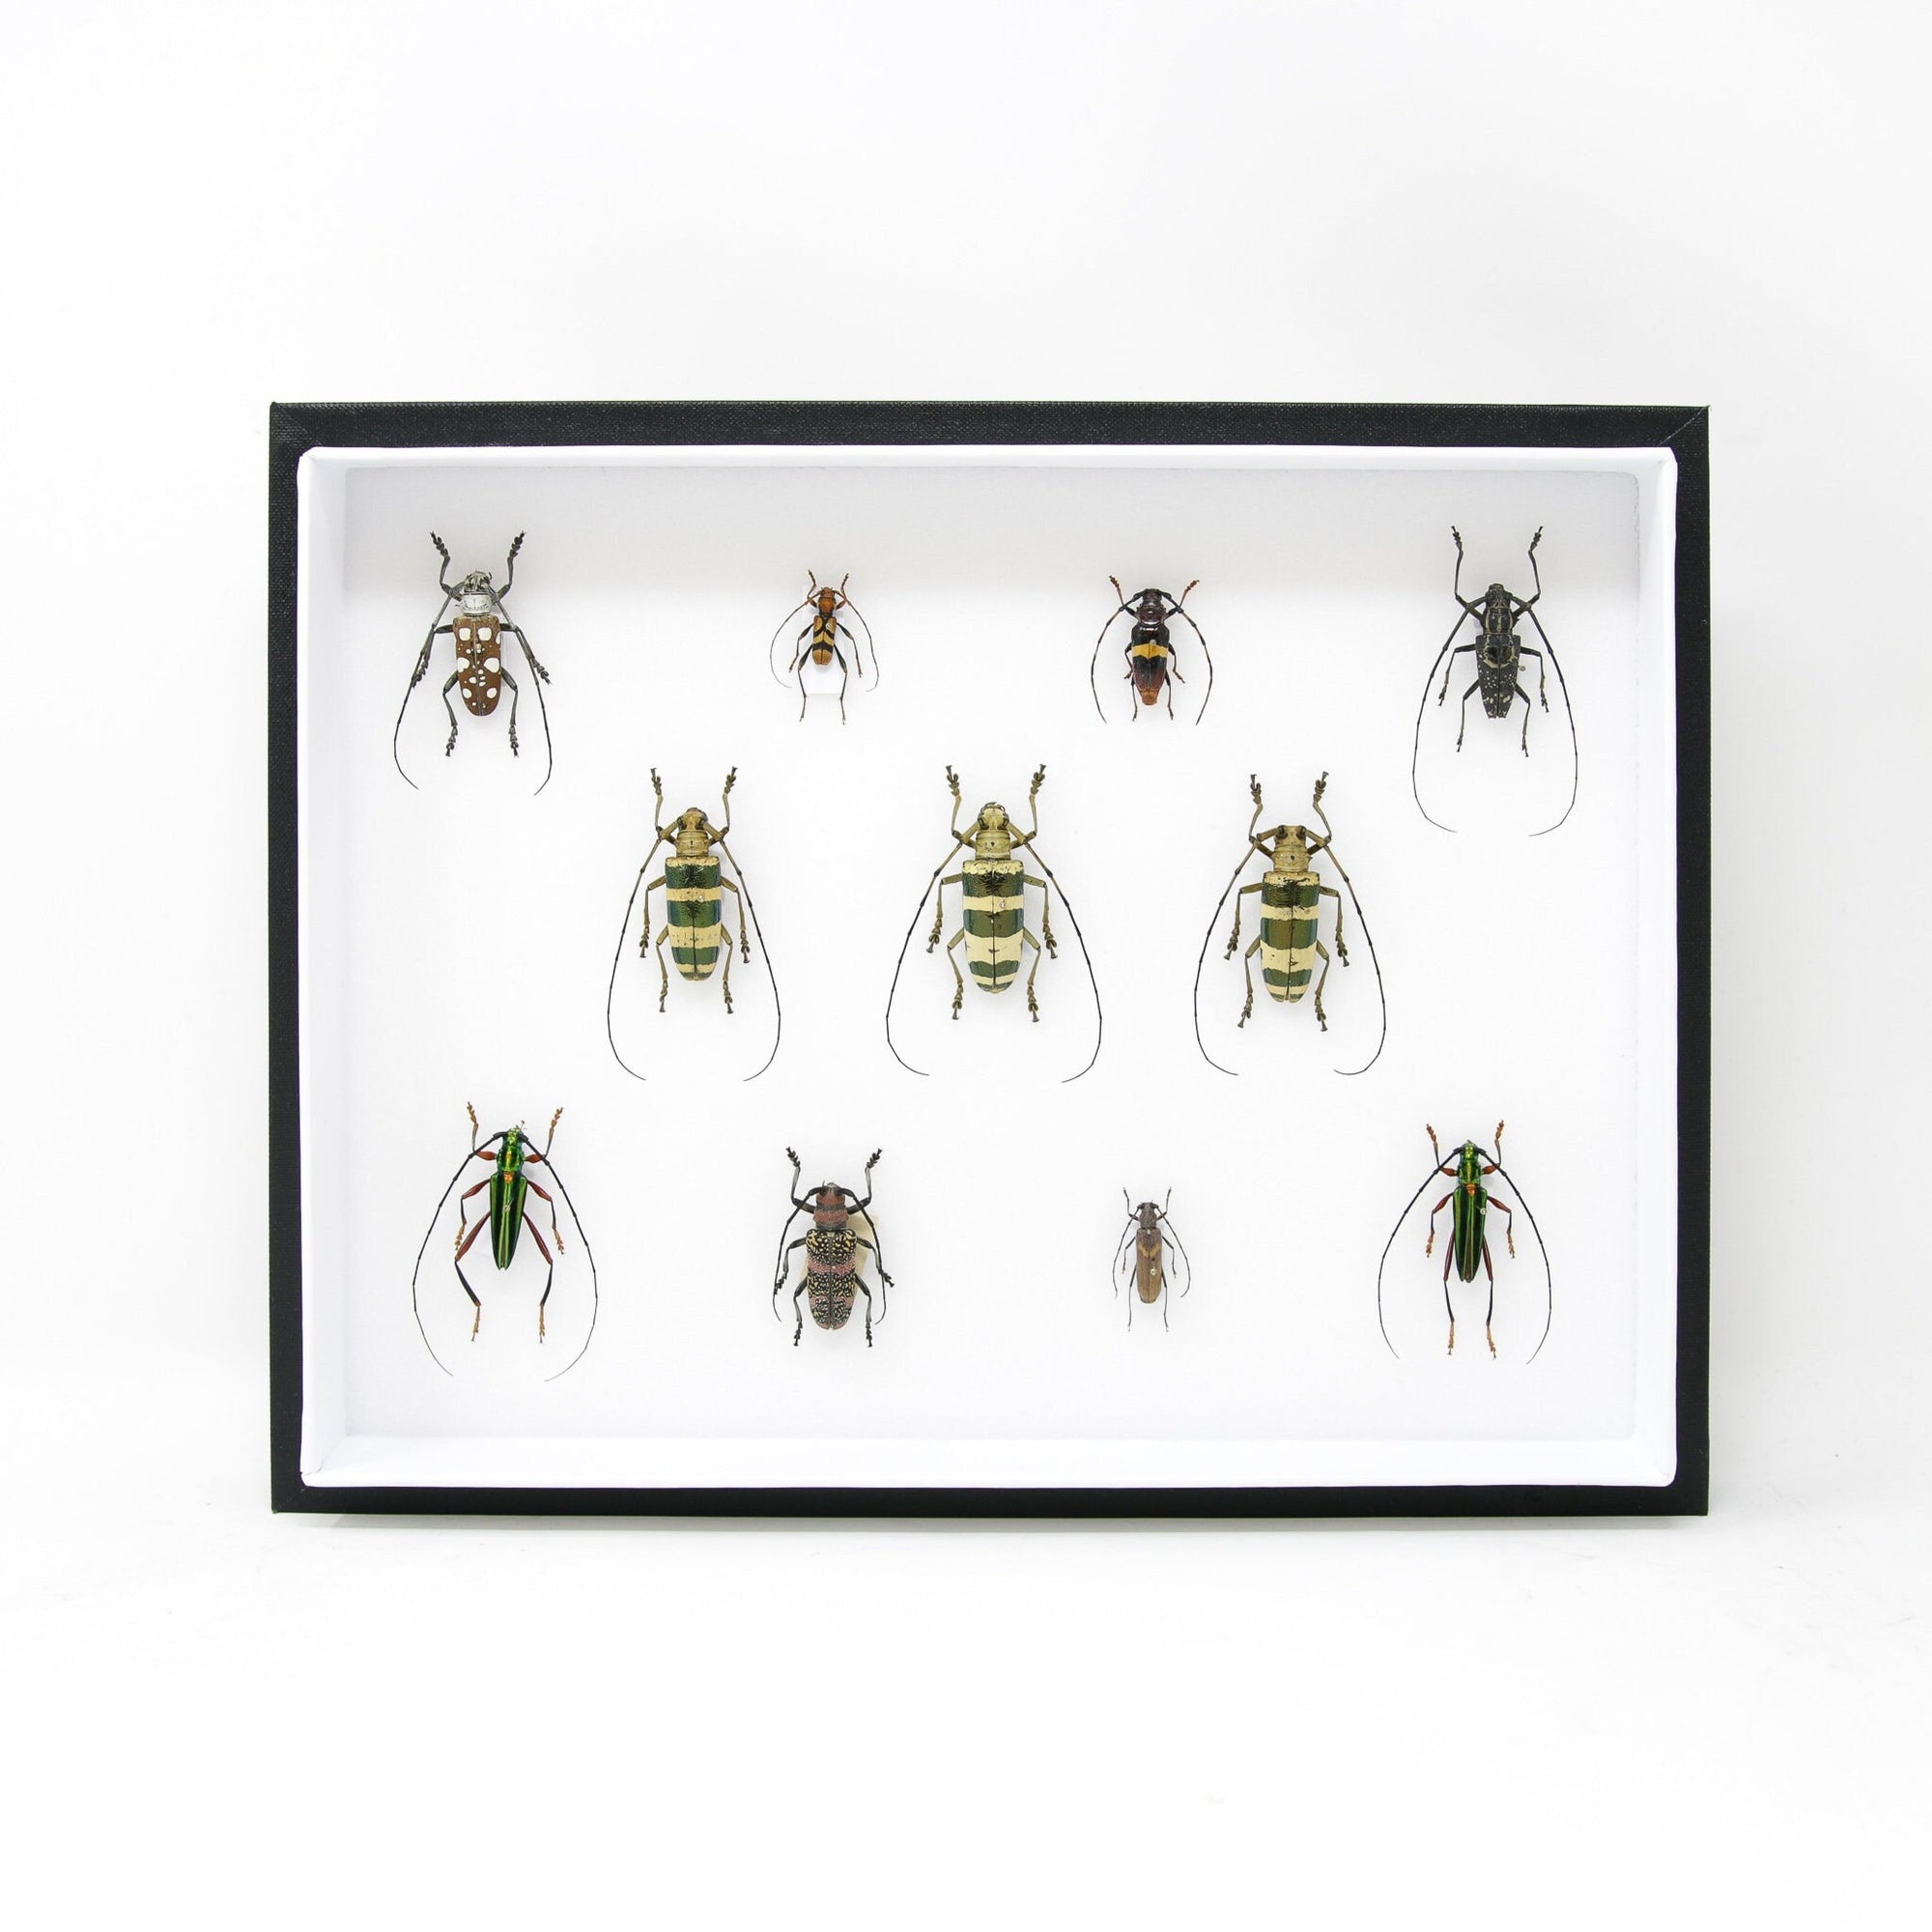 Very Fine Quality Pinned Insect Collection with Scientific Data | A1 Beetle Specimens in a Museum Entomology Box Frame | 12x9x2 inch (SKU33)